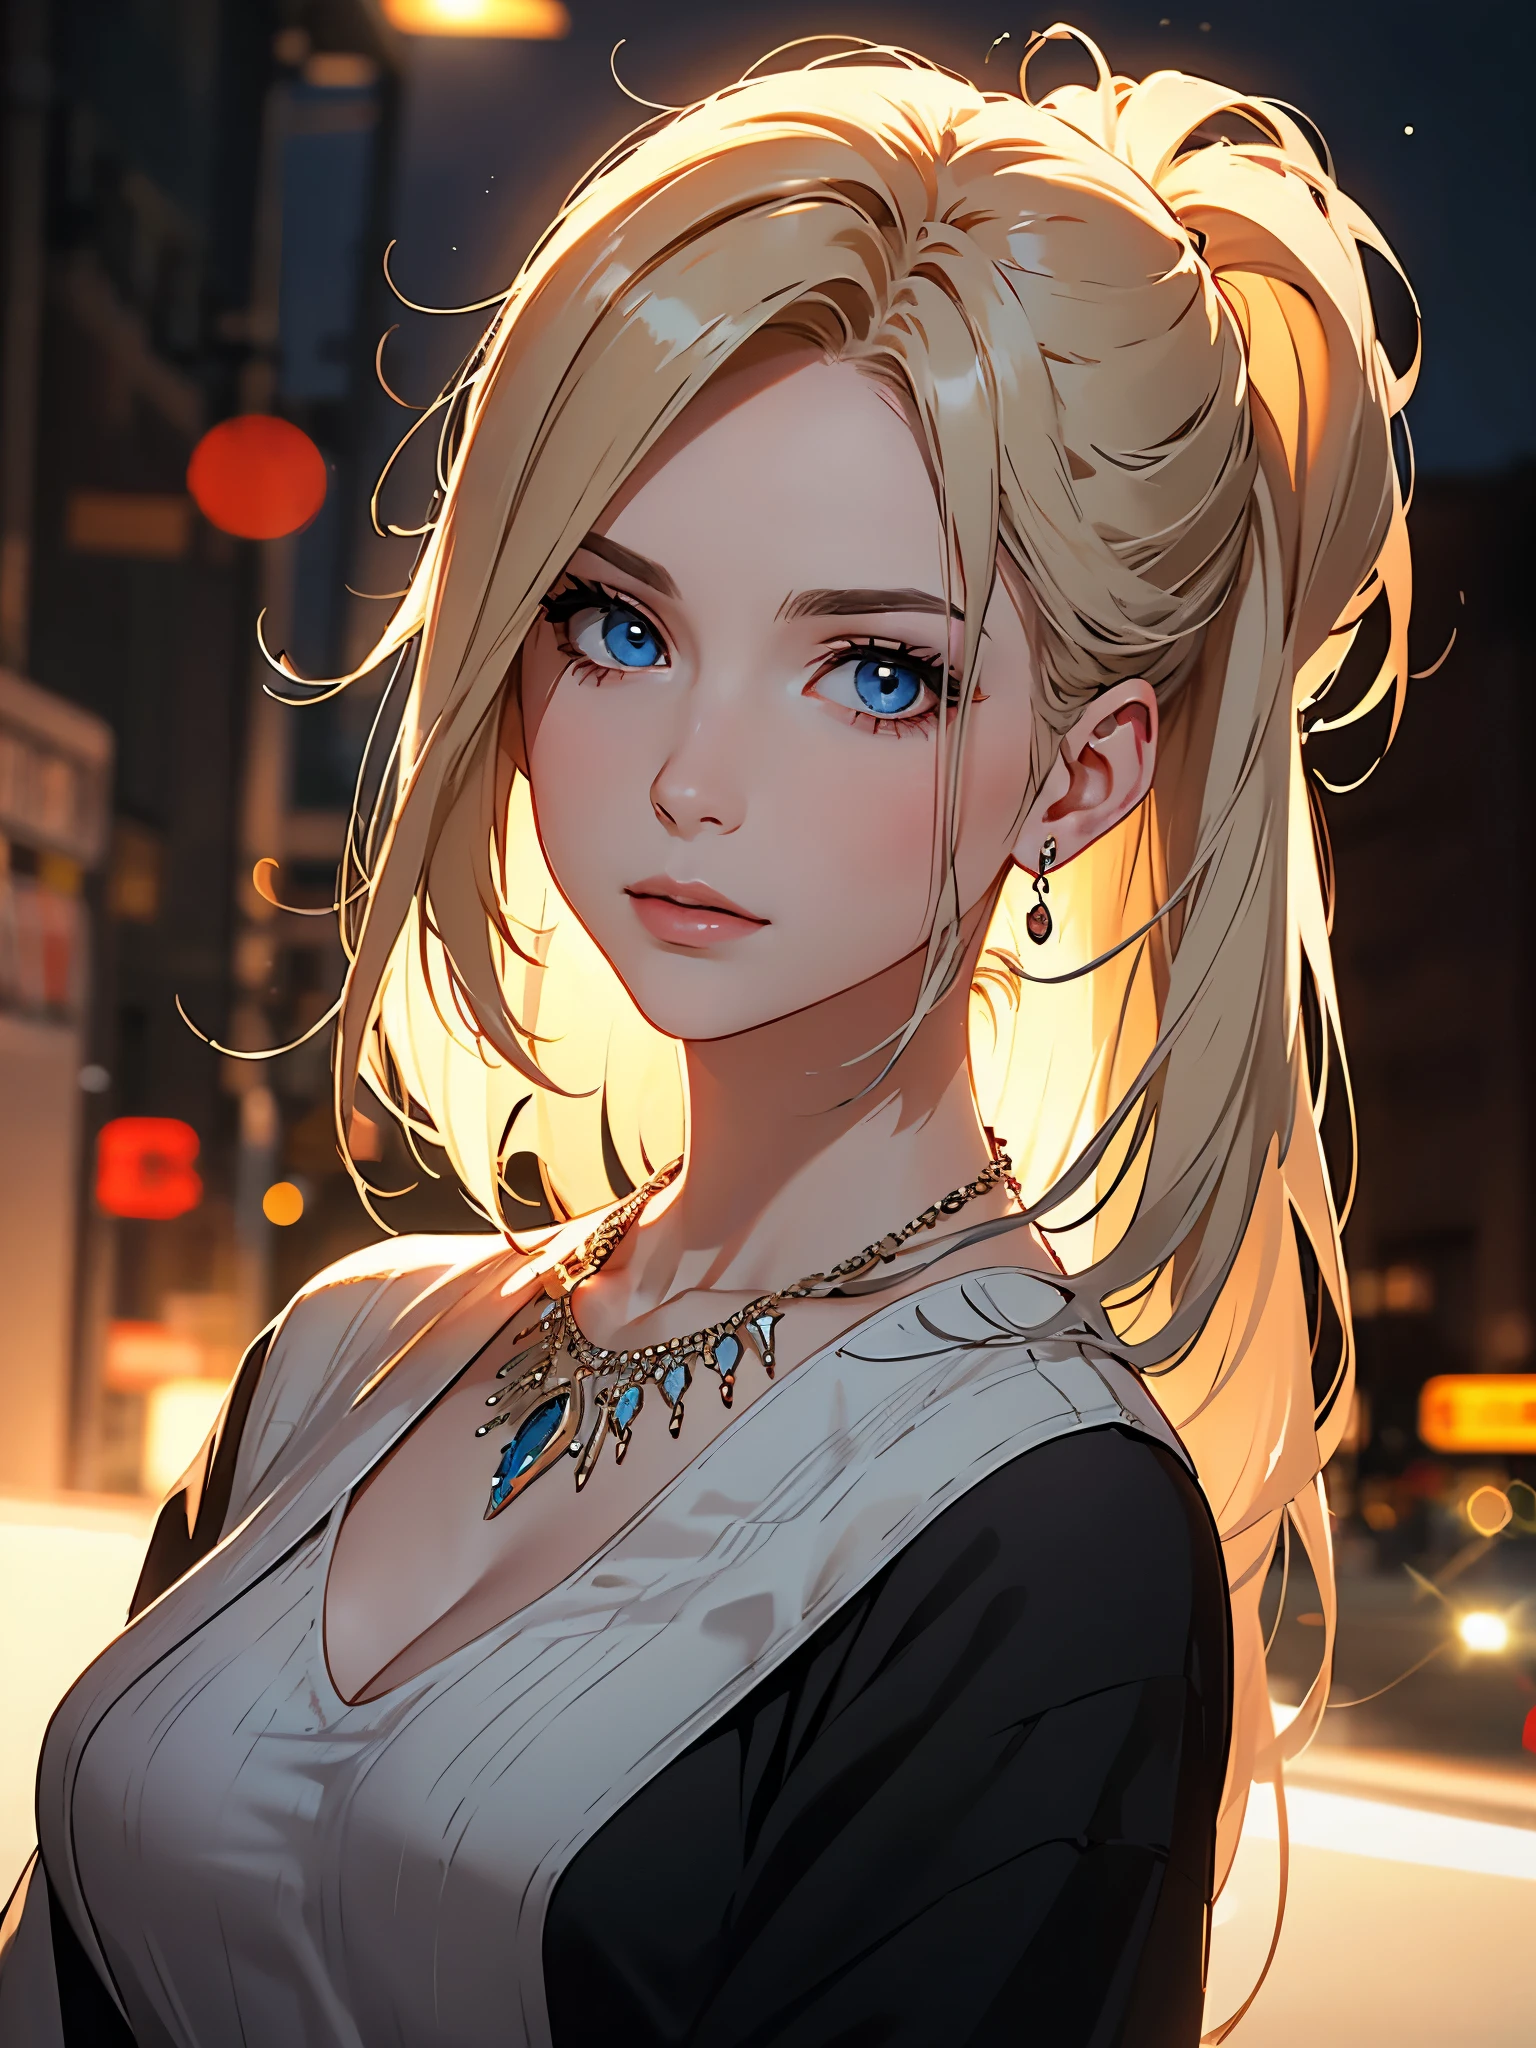 best quality, masterpiece, high resolution, A girl, blond, Blue eyes, fashion clothing, necklace, jewelry, Pretty Face, Perfect breasts, more than_Body, Tyndall effect, lifelike, Dark Studio, Side lighting, Two-color lighting, (HD Skin:1.2), 8k Ultra HD, SLR camera, Soft Light, high quality, Volumetric Lighting, frank, photography, high resolution, 4K, 8k, Bokeh,